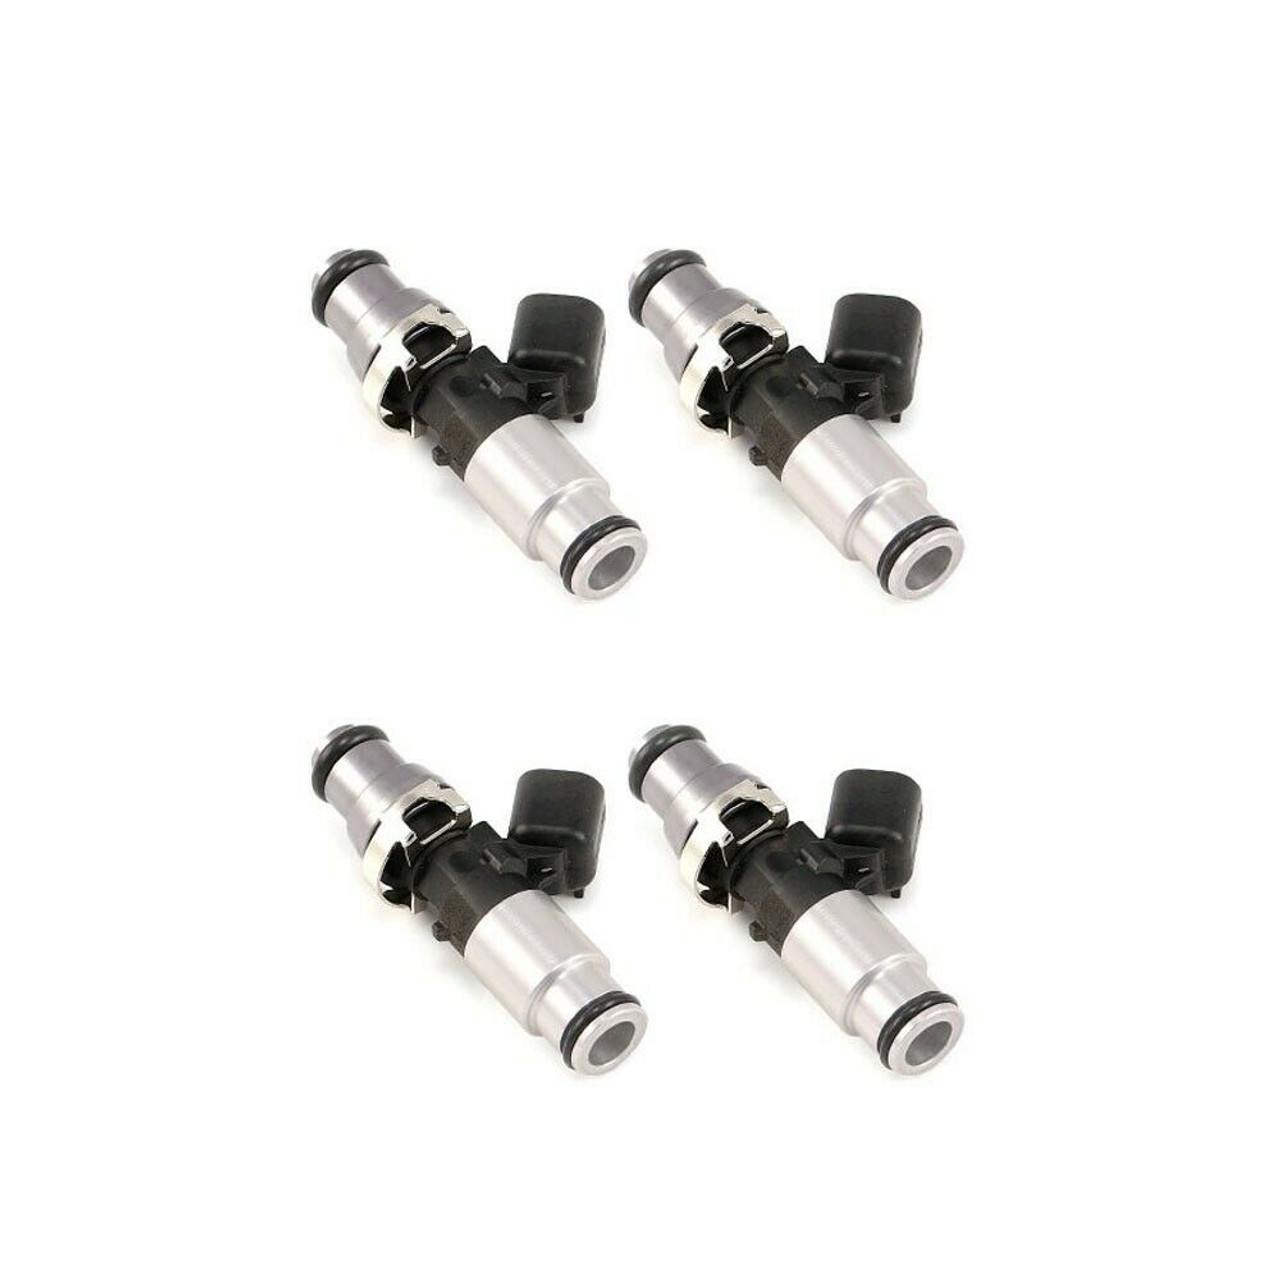 ID1700-XDS 1700.60.14.14B.4 Fuel Injectors, 14mm (grey) adapter top and (silver) bottom adapter, set of 4